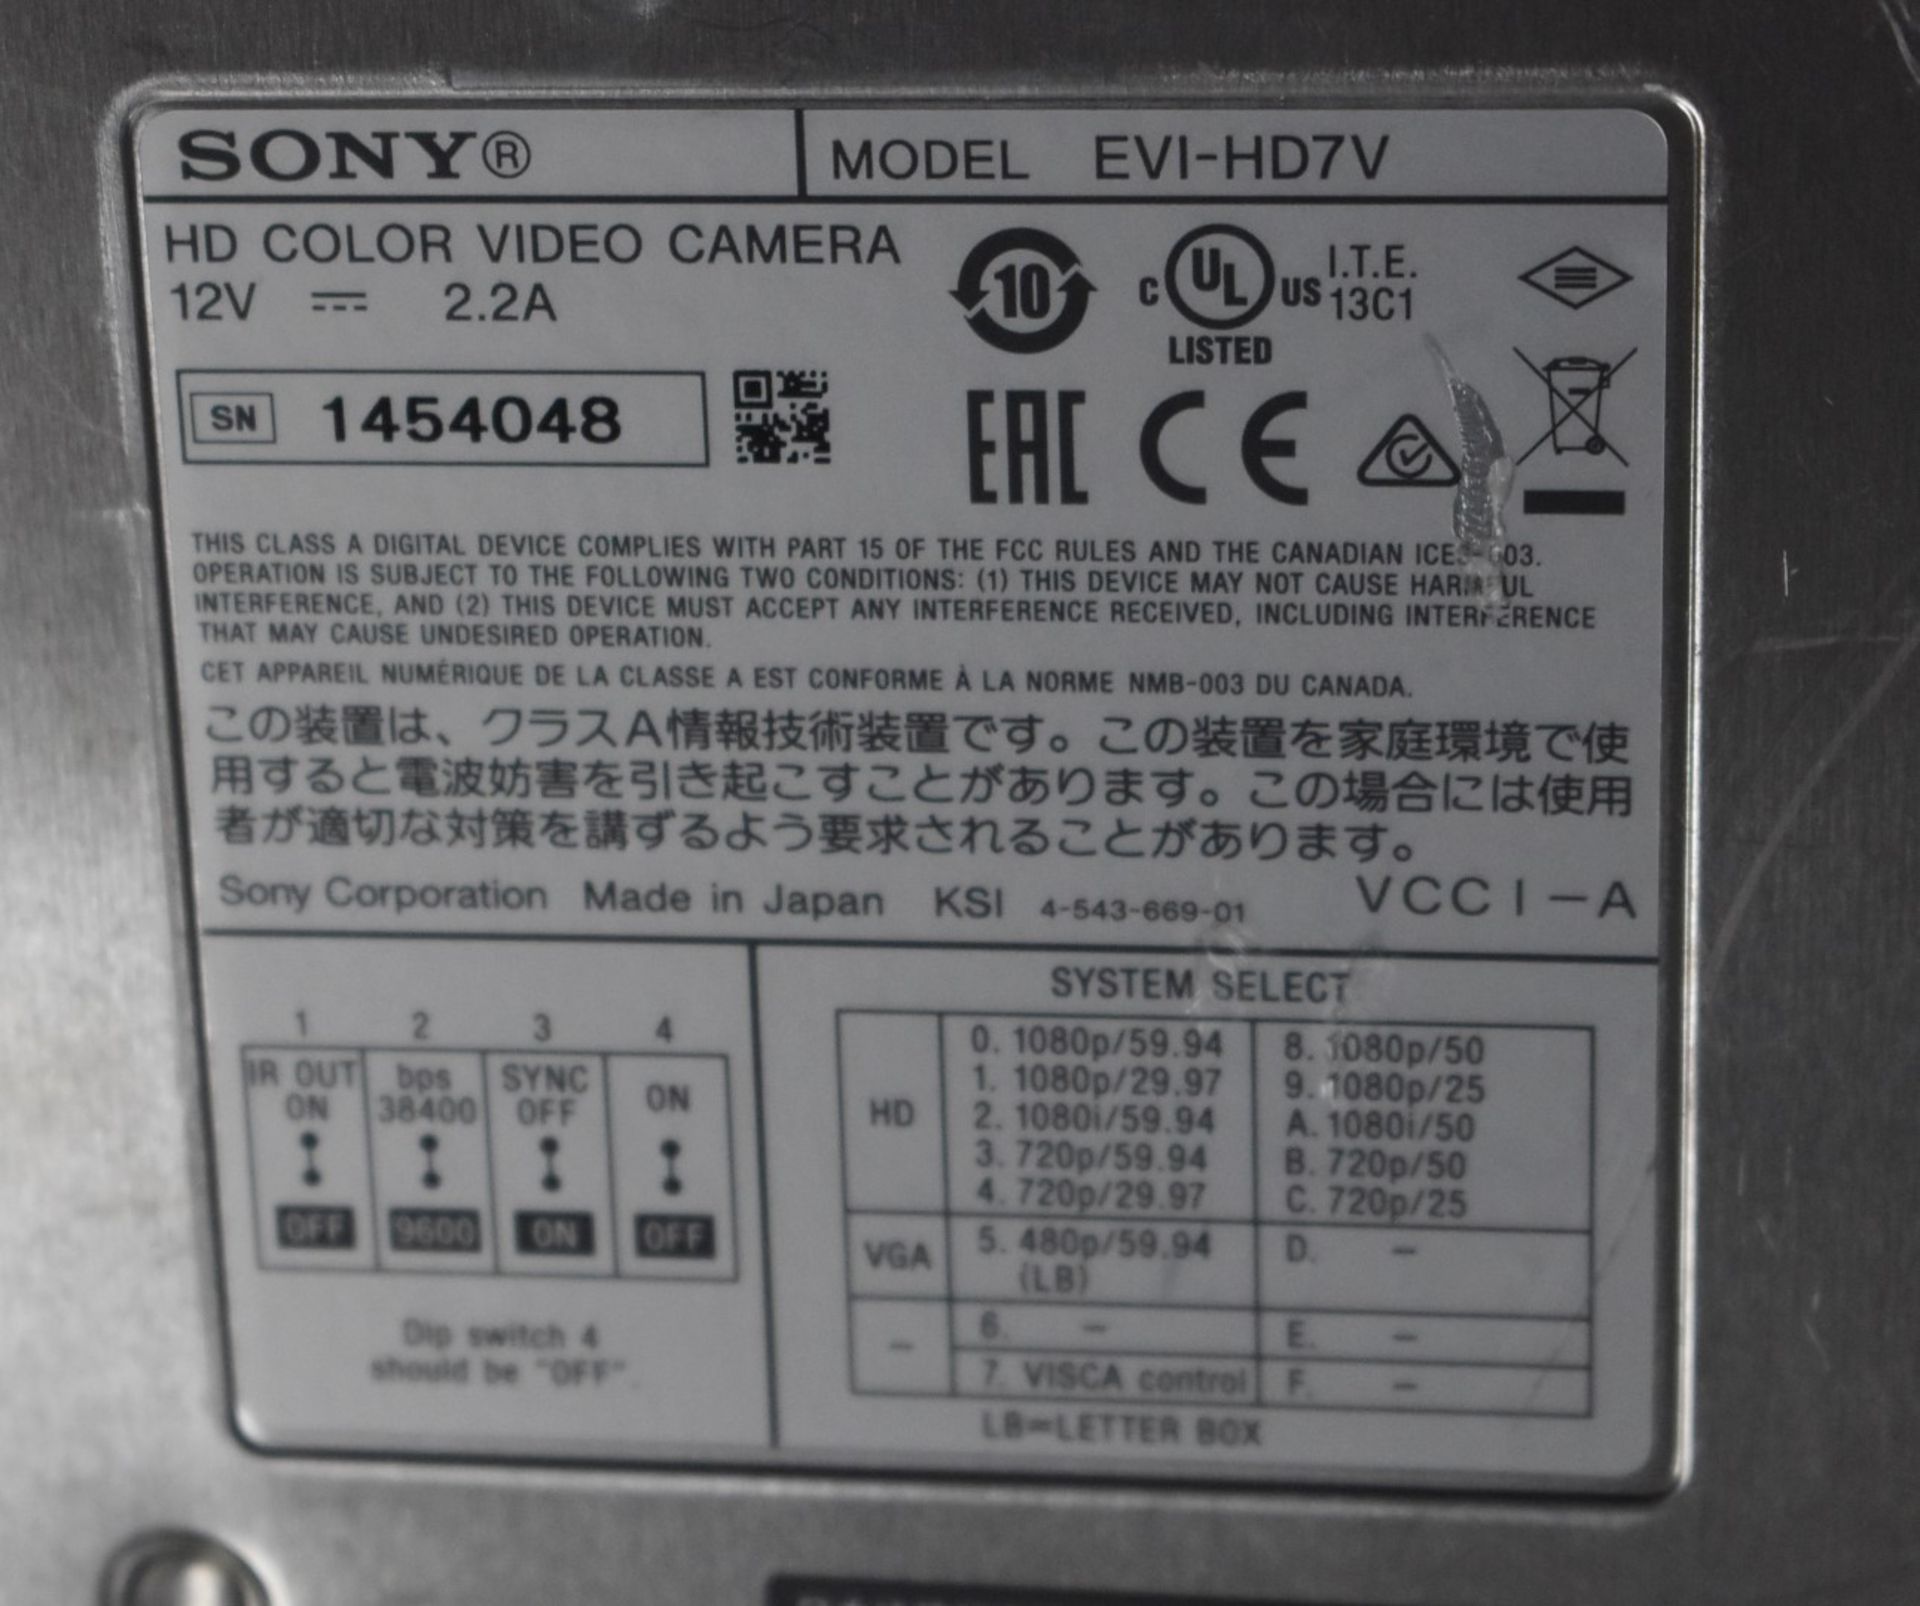 1 x Sony EVI-HD7V Full HD PTZ Videoconferenceing Camera - Includes Power Pack and Remote Control - - Image 5 of 6